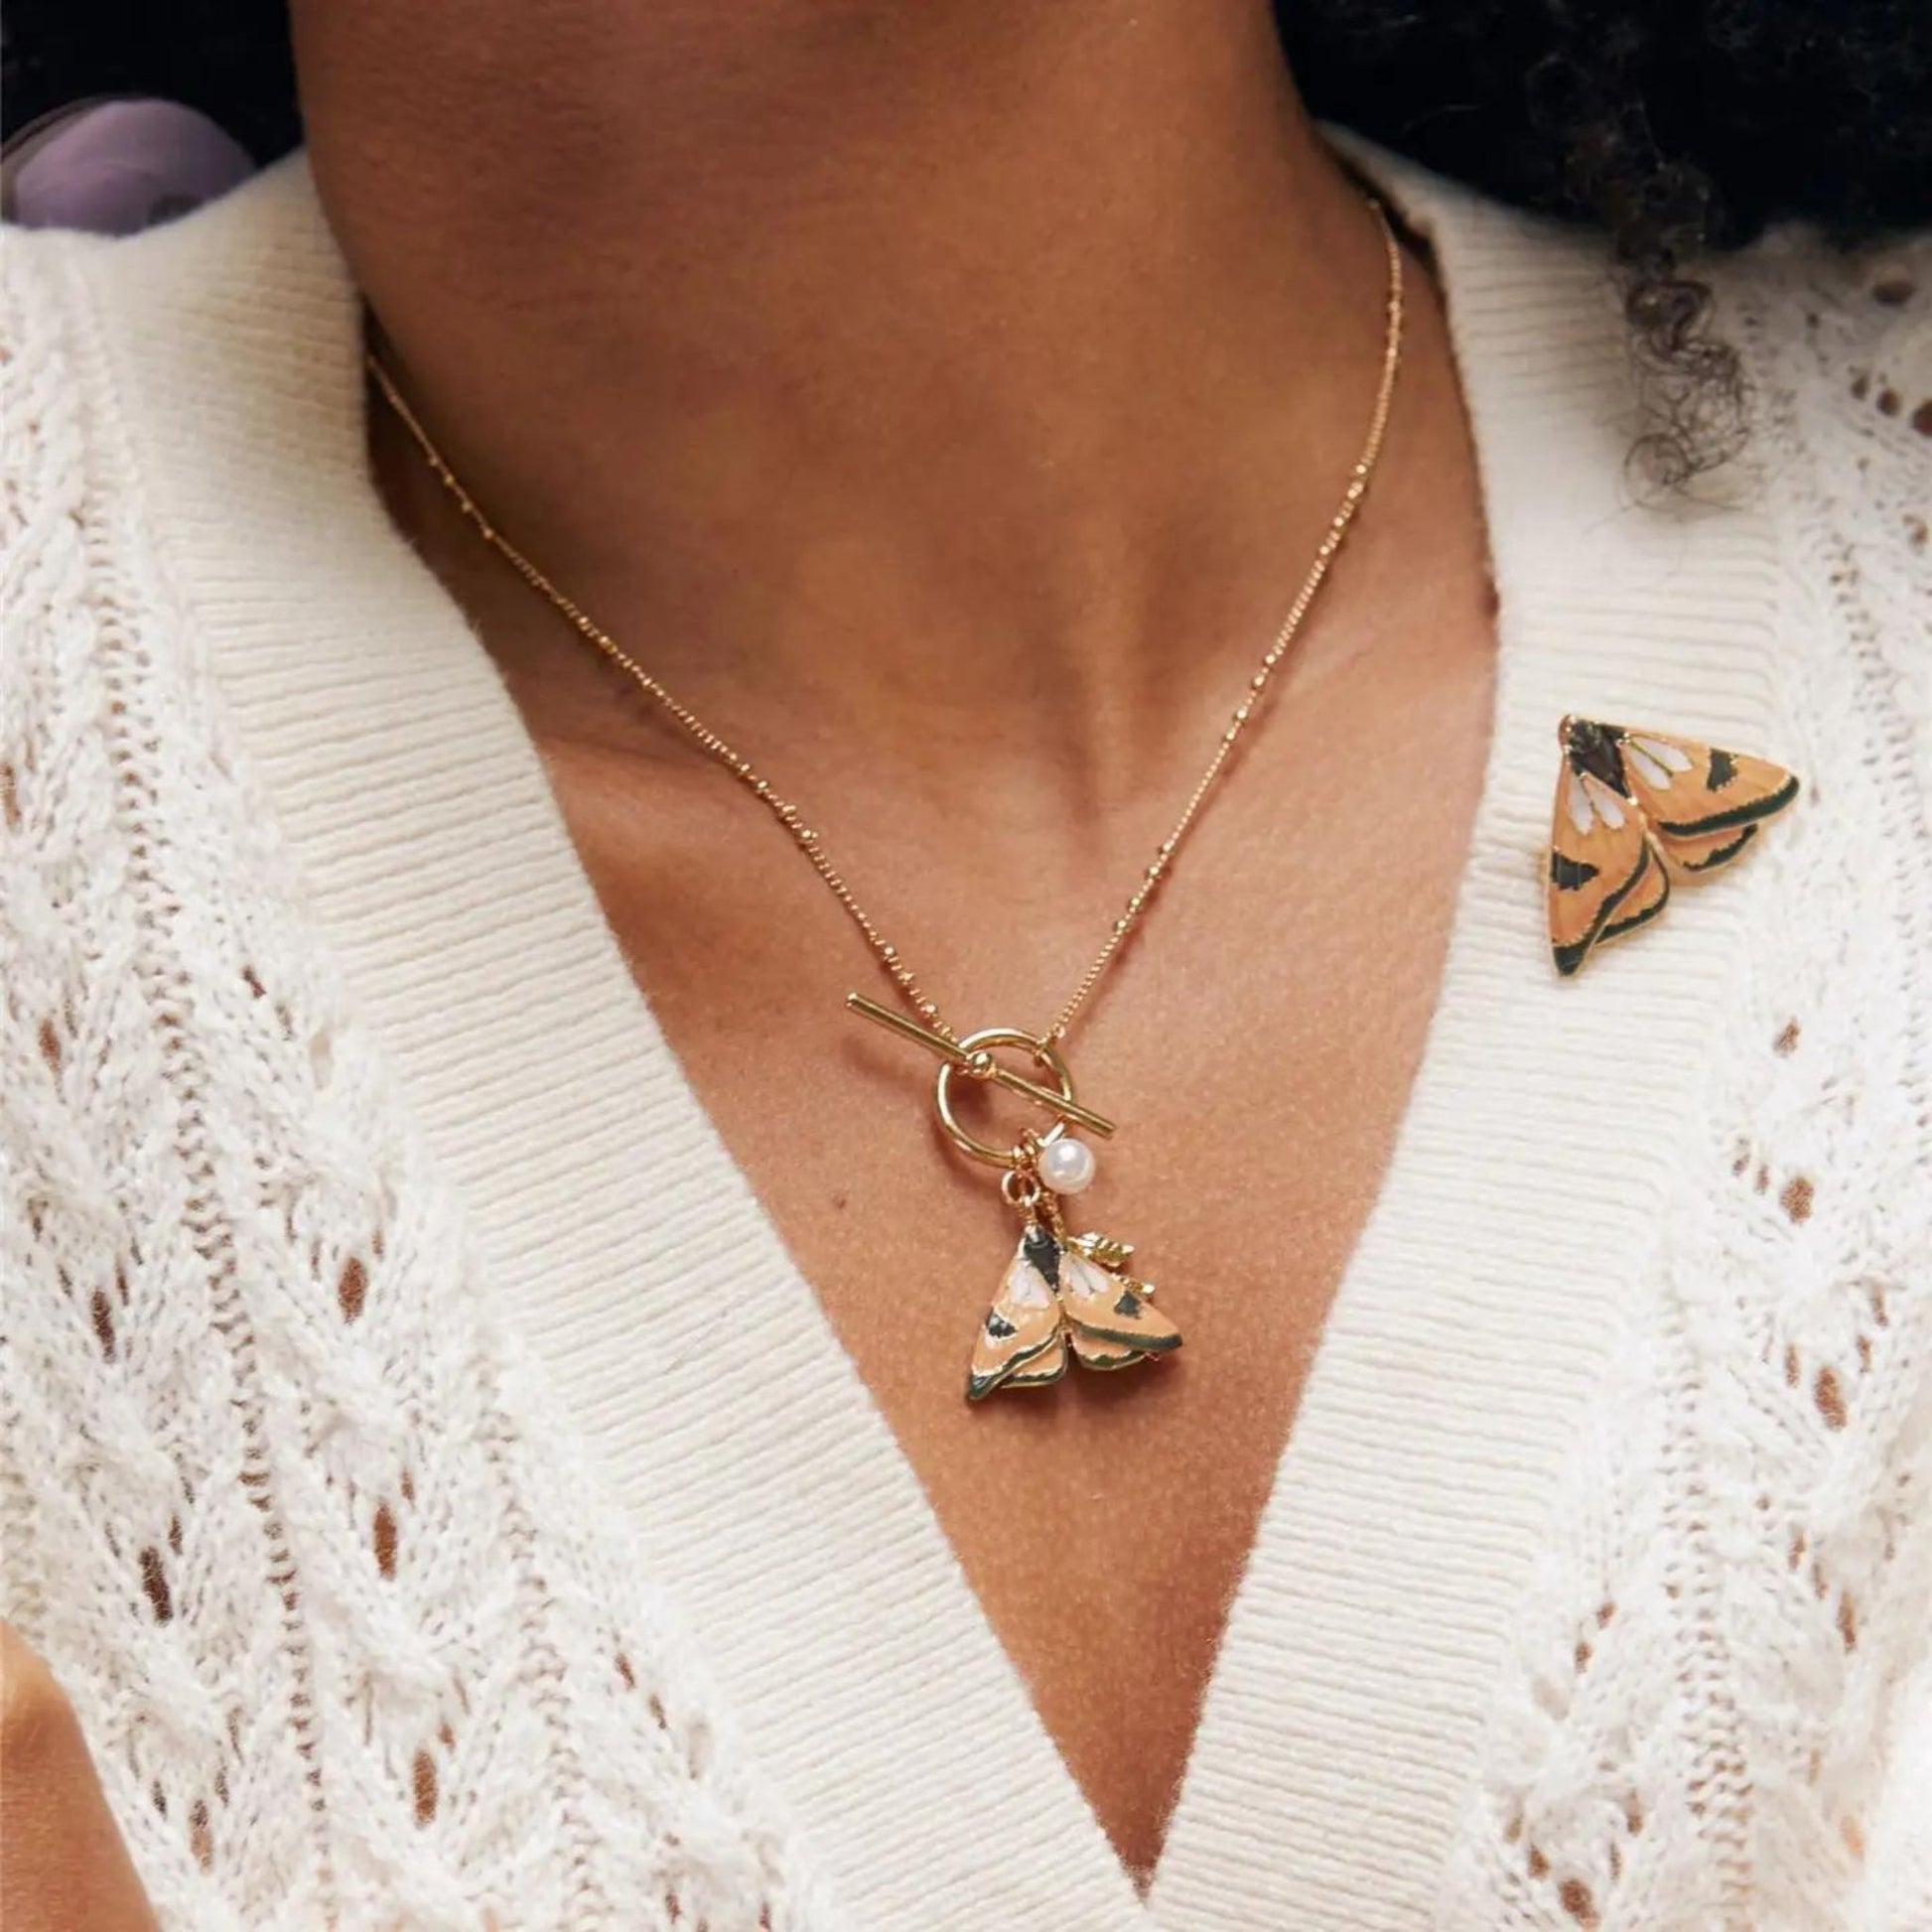 Enamel Moth & Leaf Charm Necklace - The Little Jewellery Company